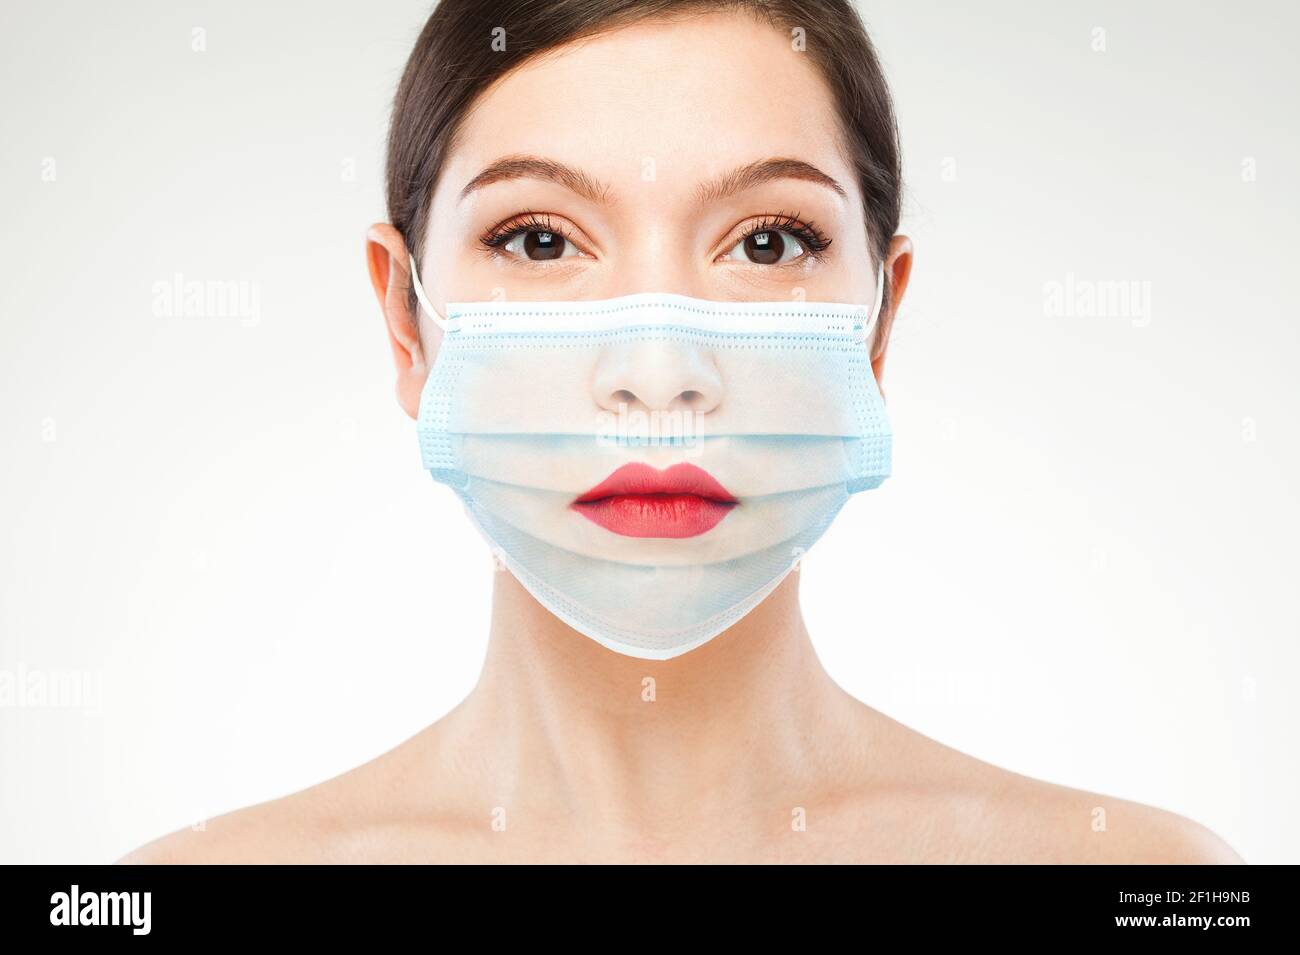 Beautiful caucasian young woman headshot,wearing transparent medical face mask,COVID-19 new normal concept,creative edit showing red lips Stock Photo